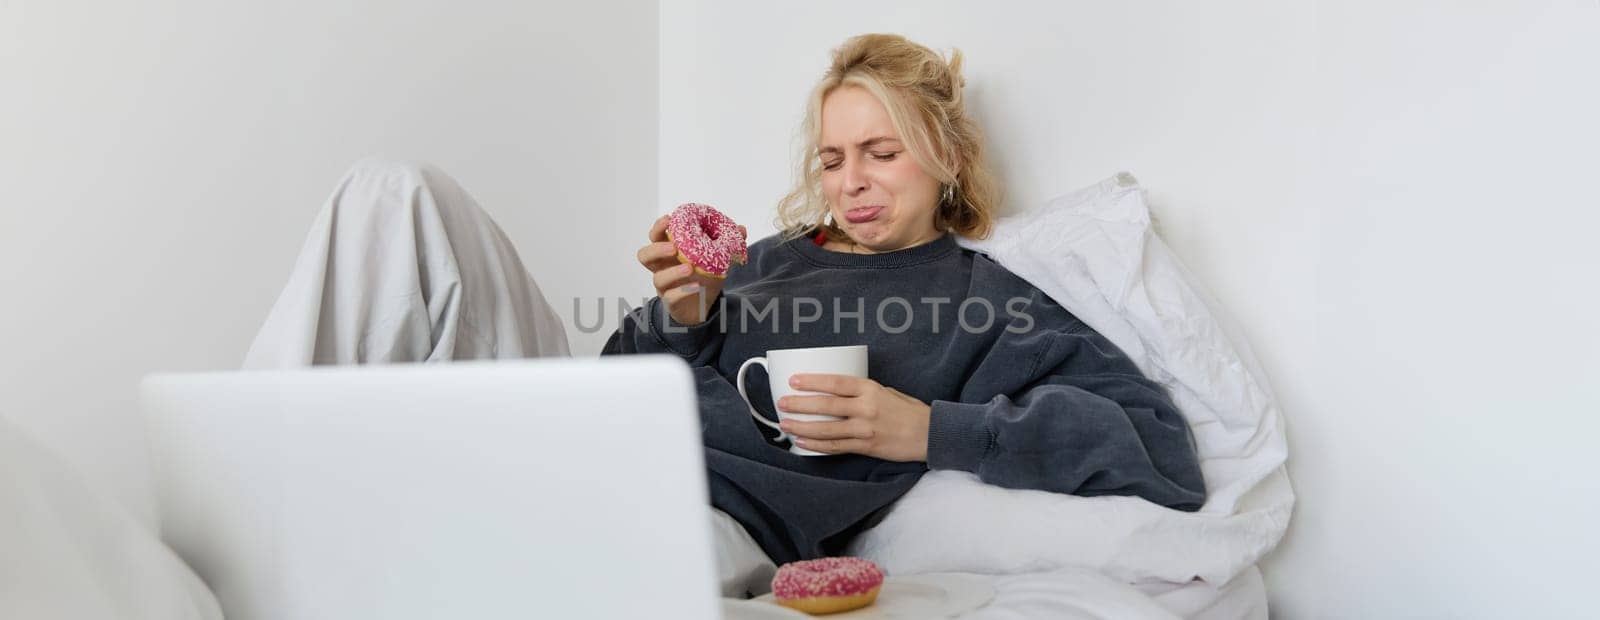 Portrait of woman watching sad movie on laptop, crying and wiping tears off, eating doughnut and drinking tea.